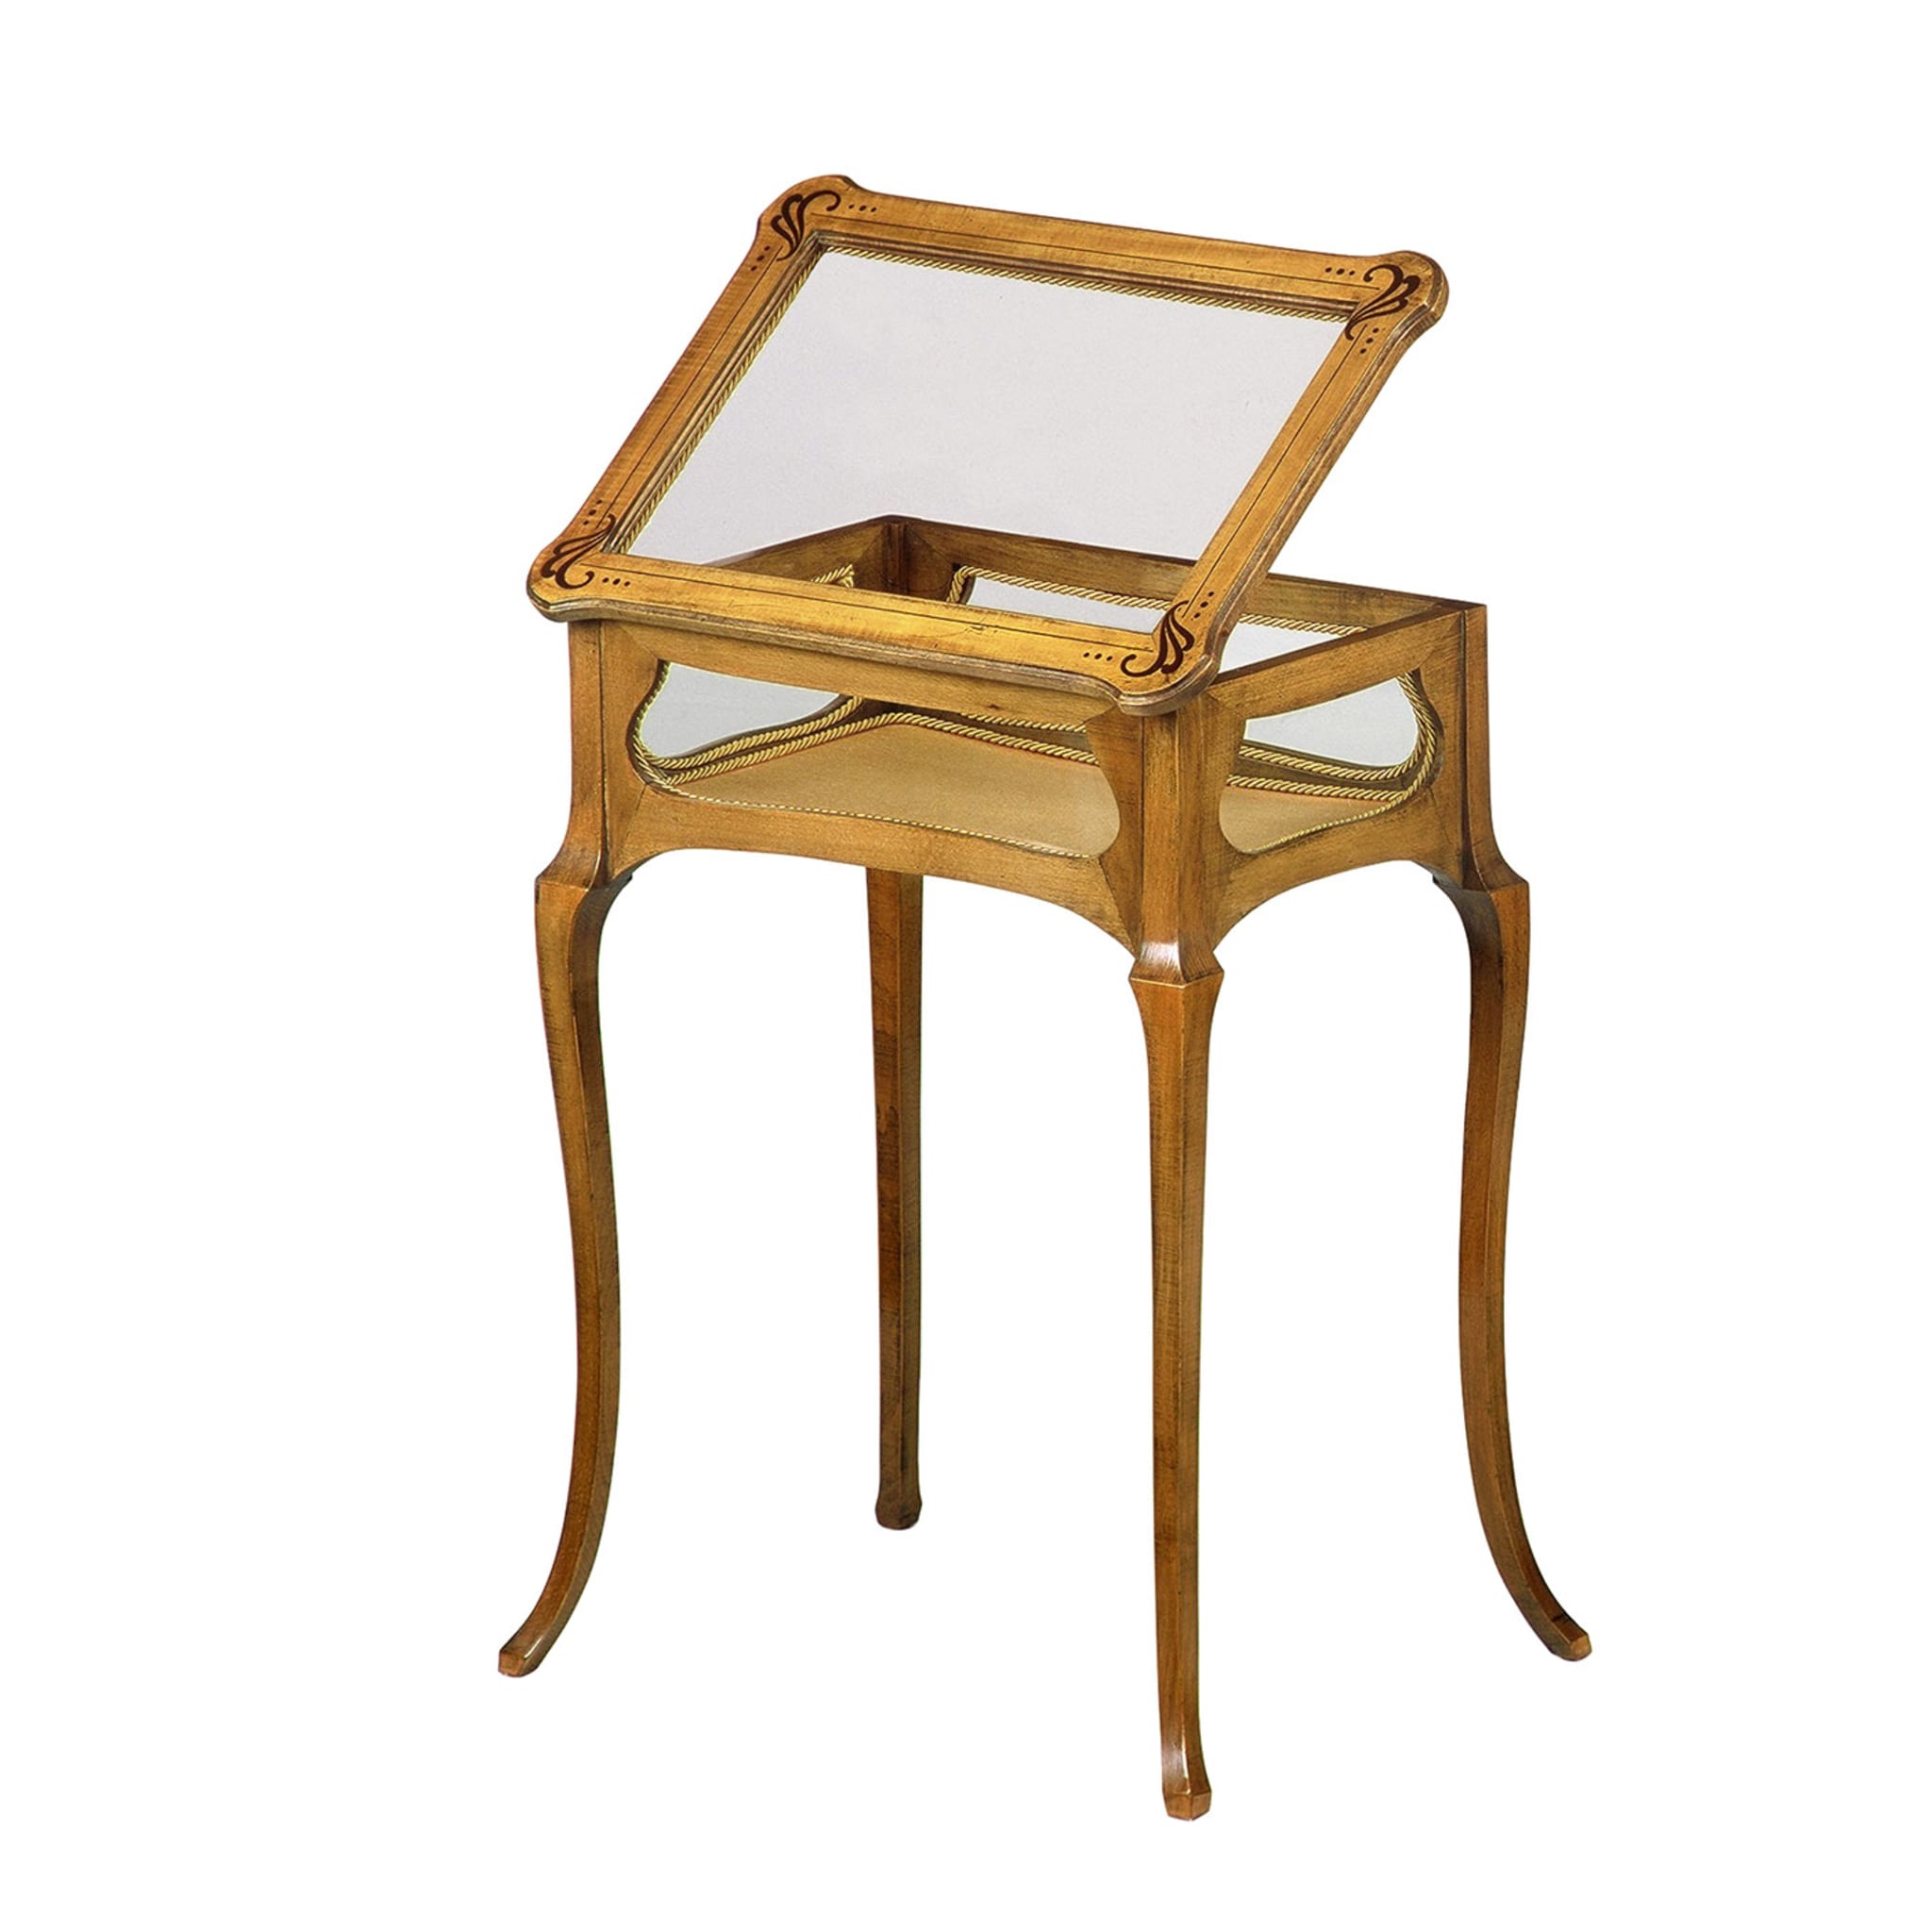 French Art Nouveau-Style Display Side Table - Alternative view 1